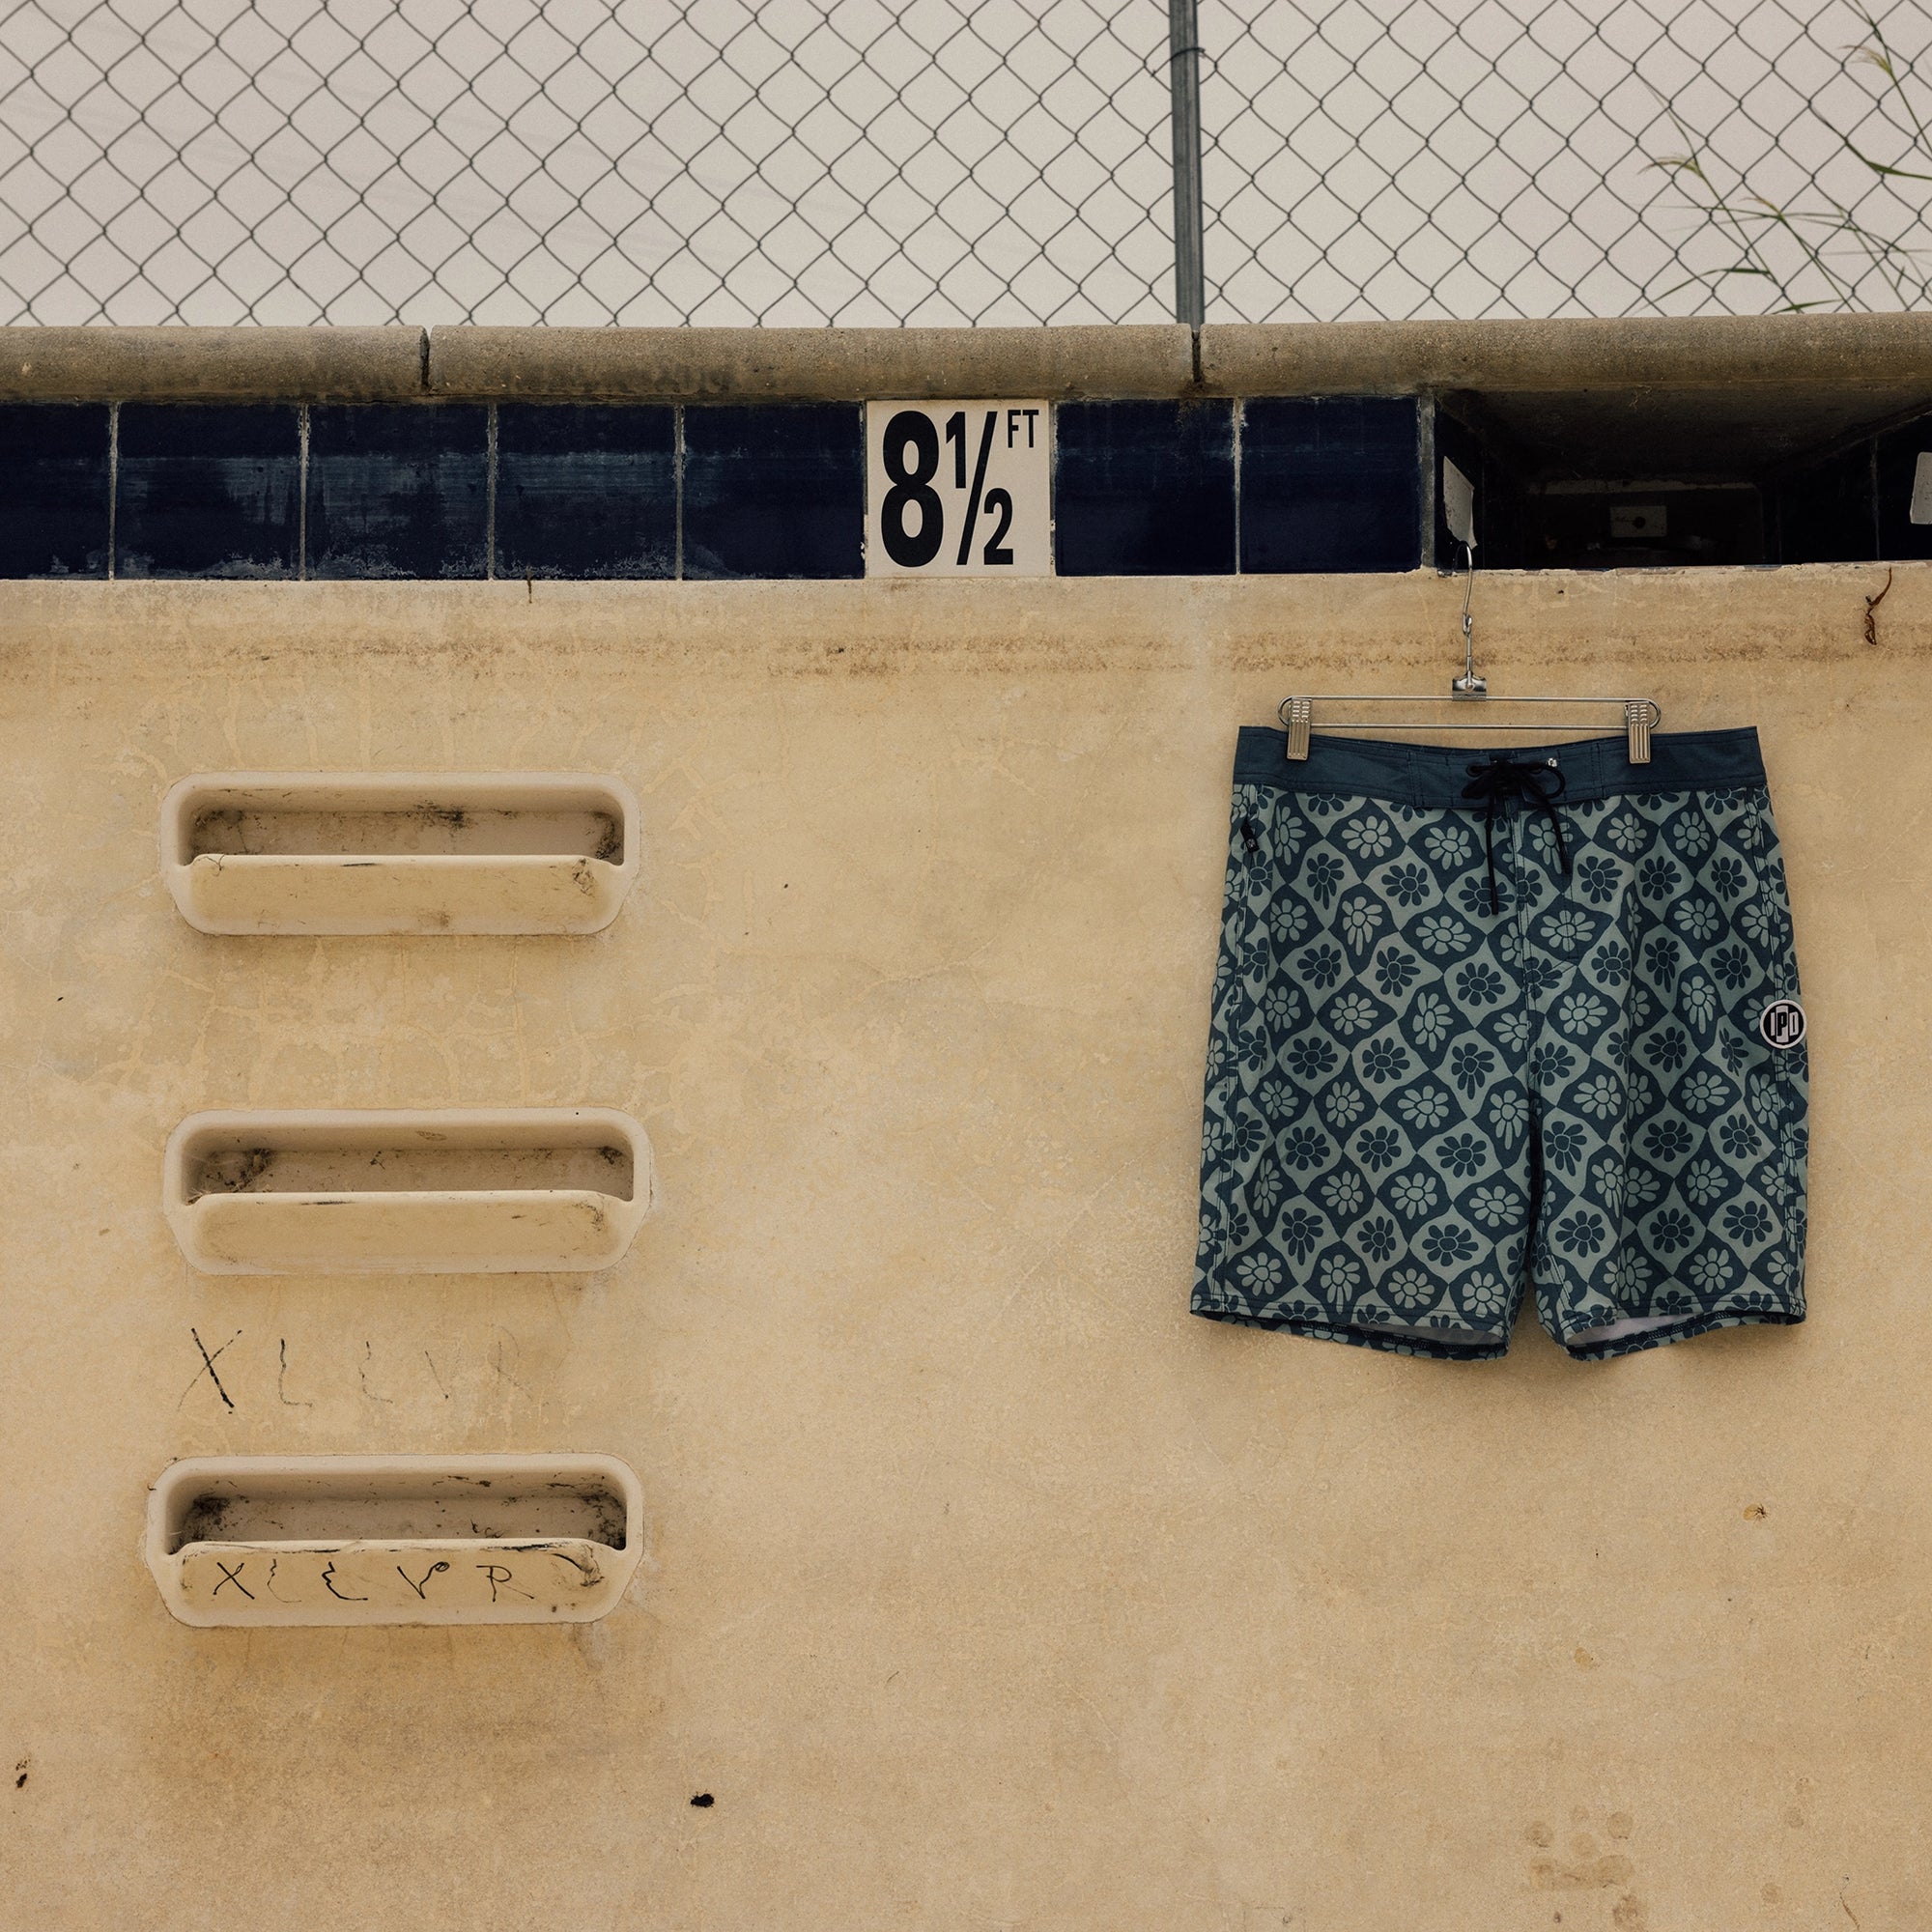 IPD flower print board shorts in blue laid on rocky surface." 